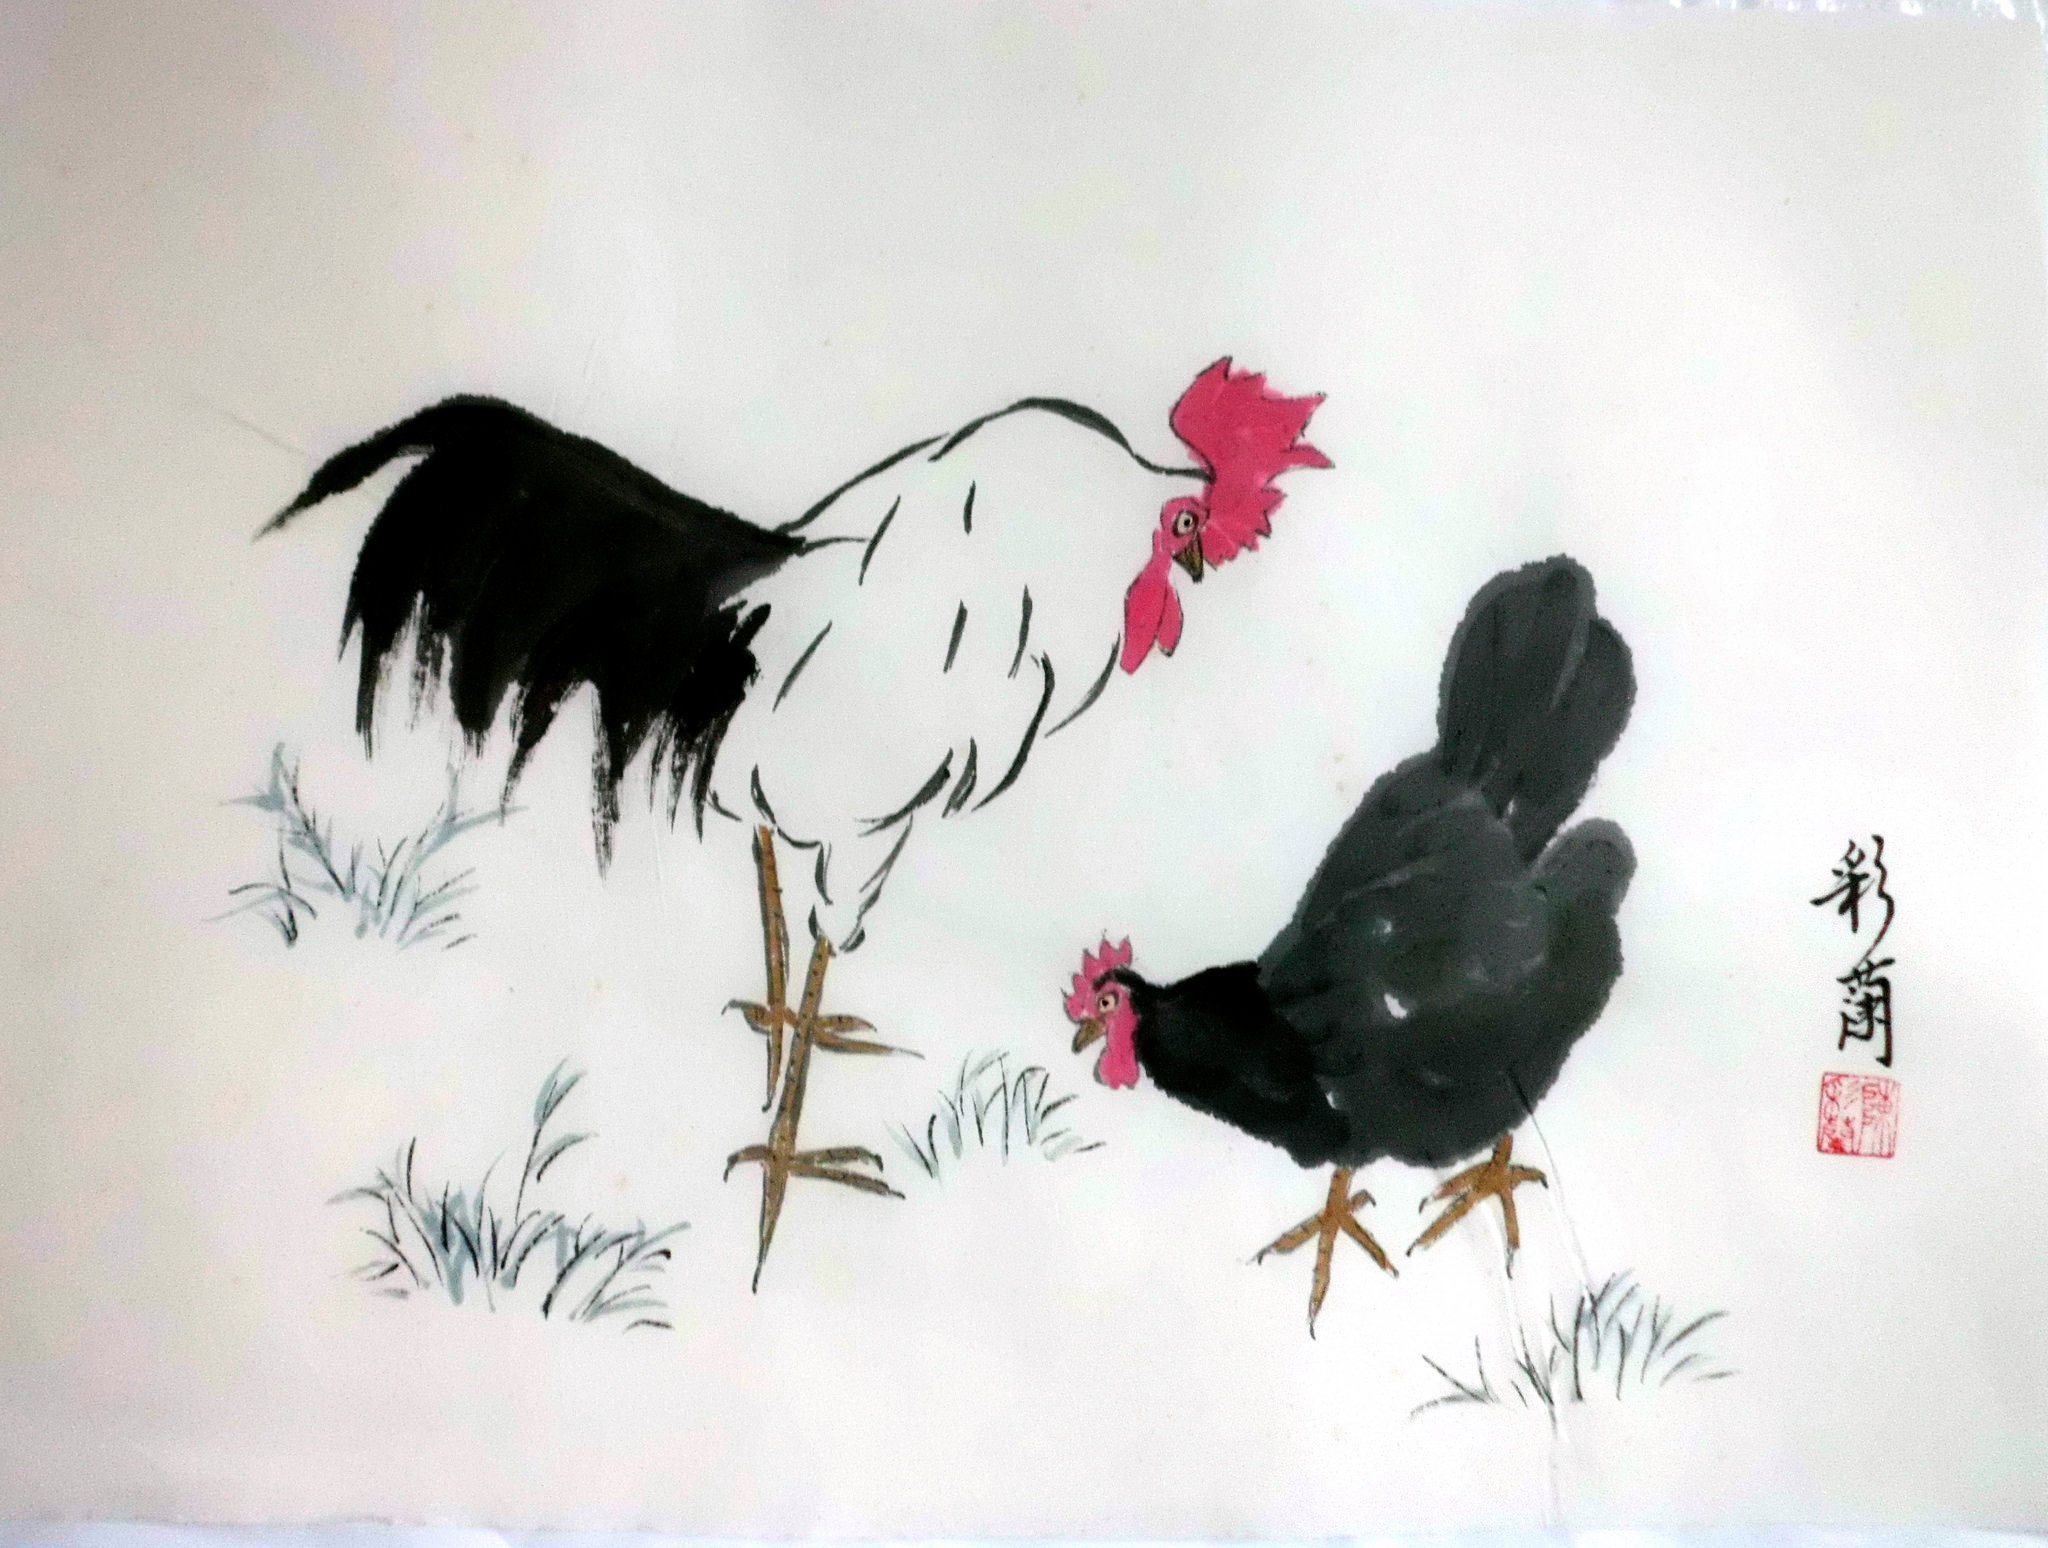 Celebrate Year of the Rooster with the best chicken science